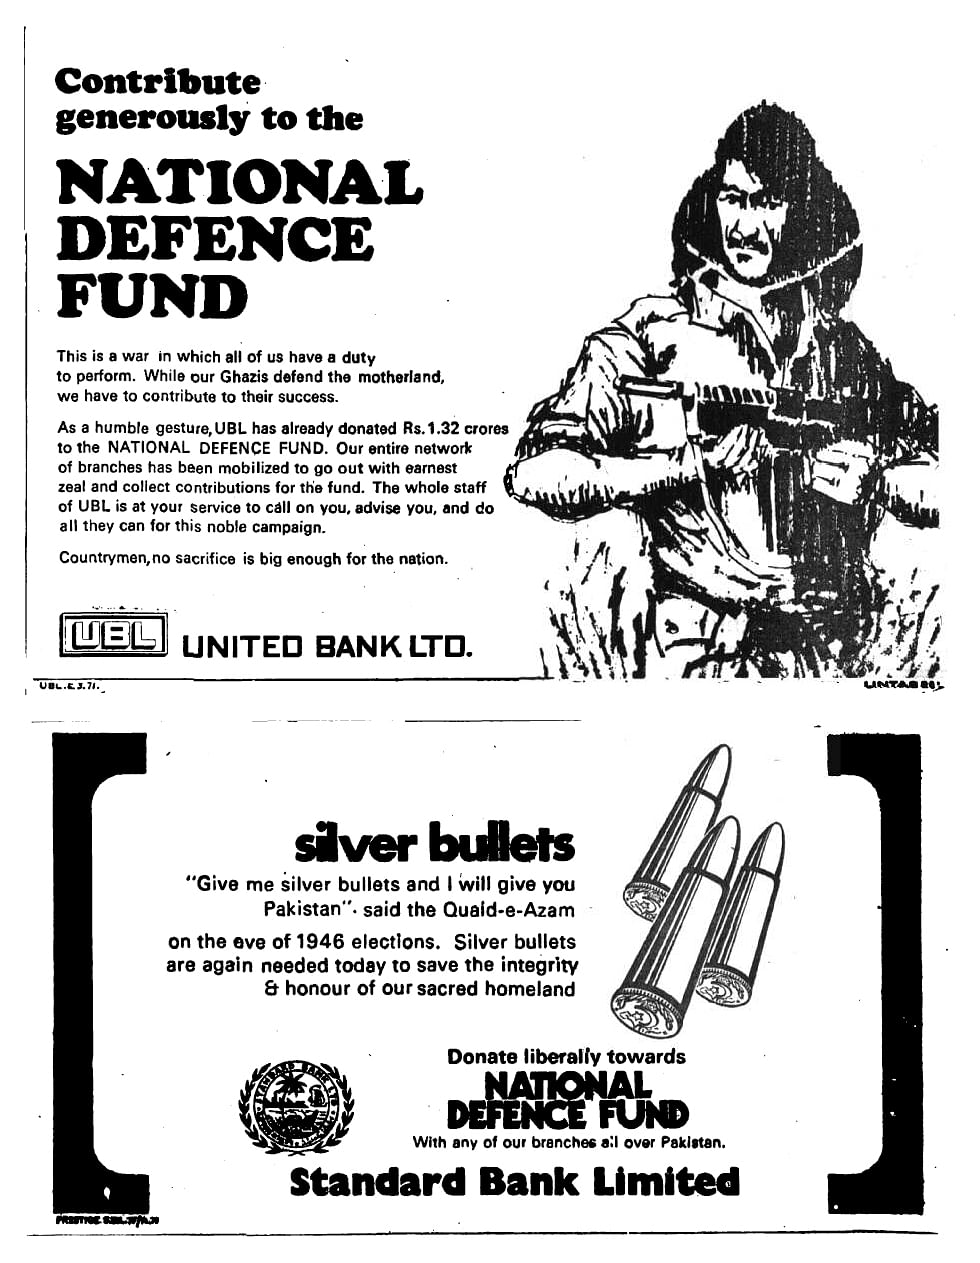 Pakistan's English daily The Dawn has republished these adverts which were run on December 14-18, 1971. See The Daily Star online for more images. Image: The Dawn